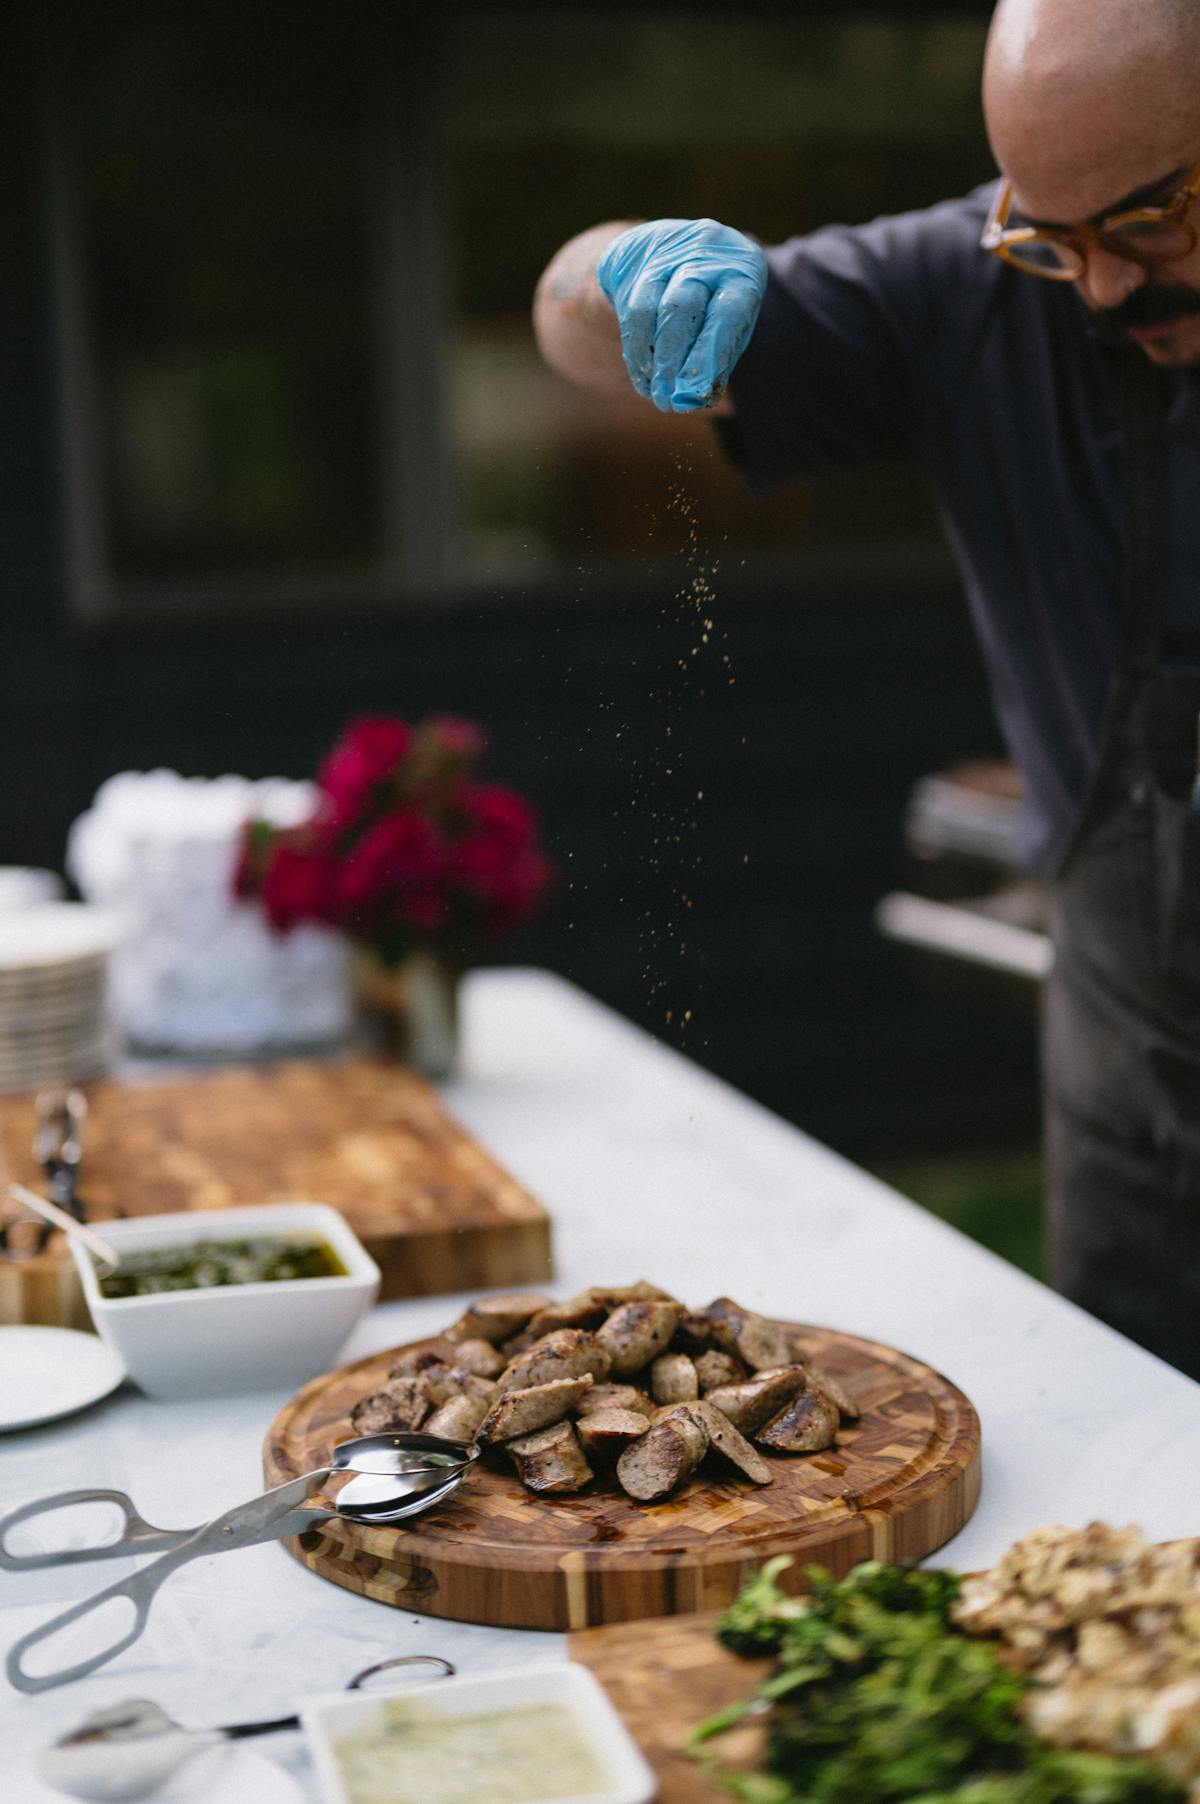 A chef from Michelle Bernstein Catering sprinkling salt and seasoning on a plate of sausages.